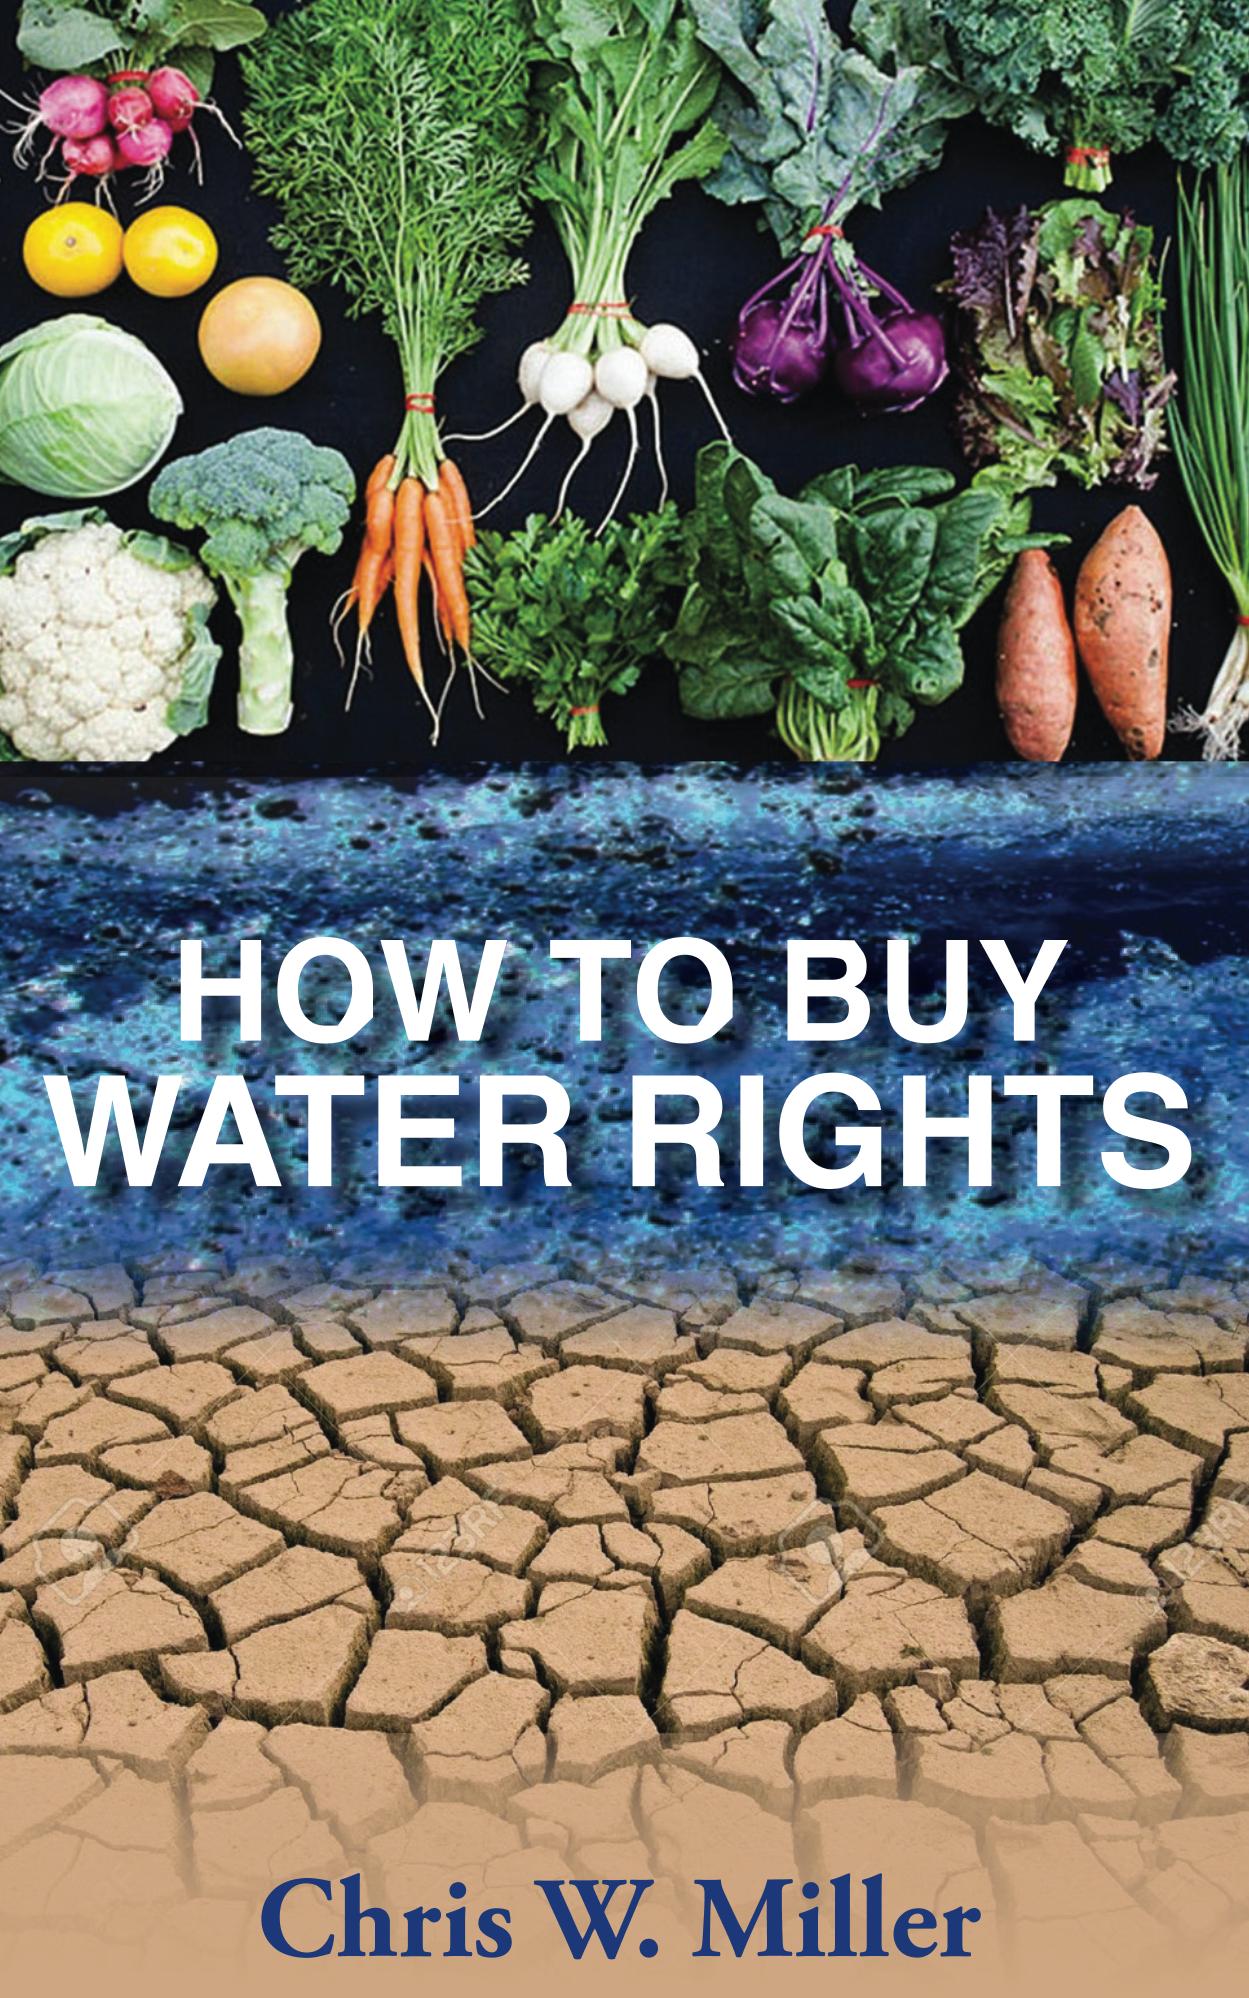 New release book "How to Buy Water Rights" now avaiable on Amazon. Order your copy today,&nbsp;http://www.amazon.com/dp/0997094907